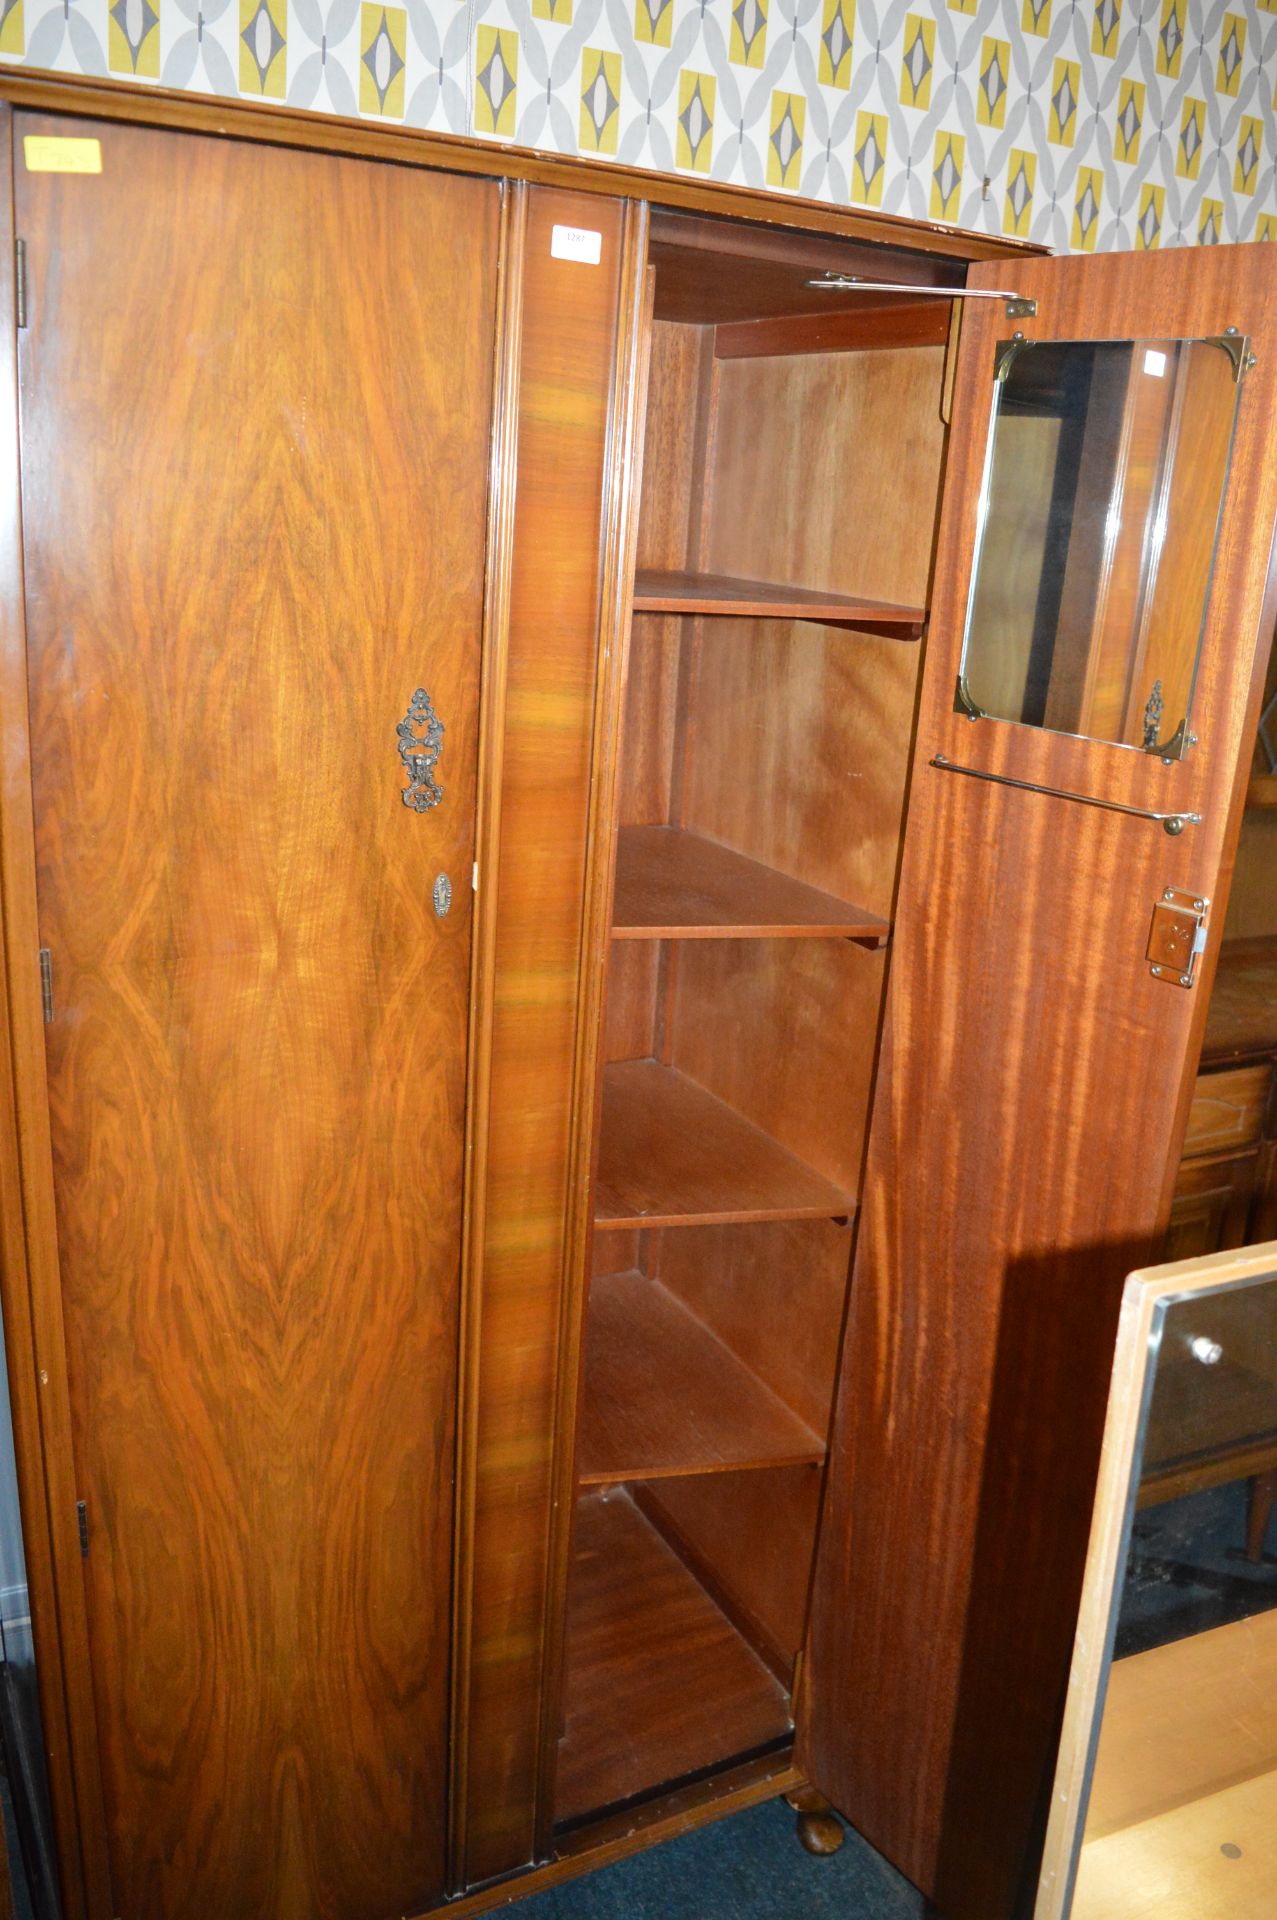 Vintage Double Wardrobe with Interior Shelving - Image 2 of 2